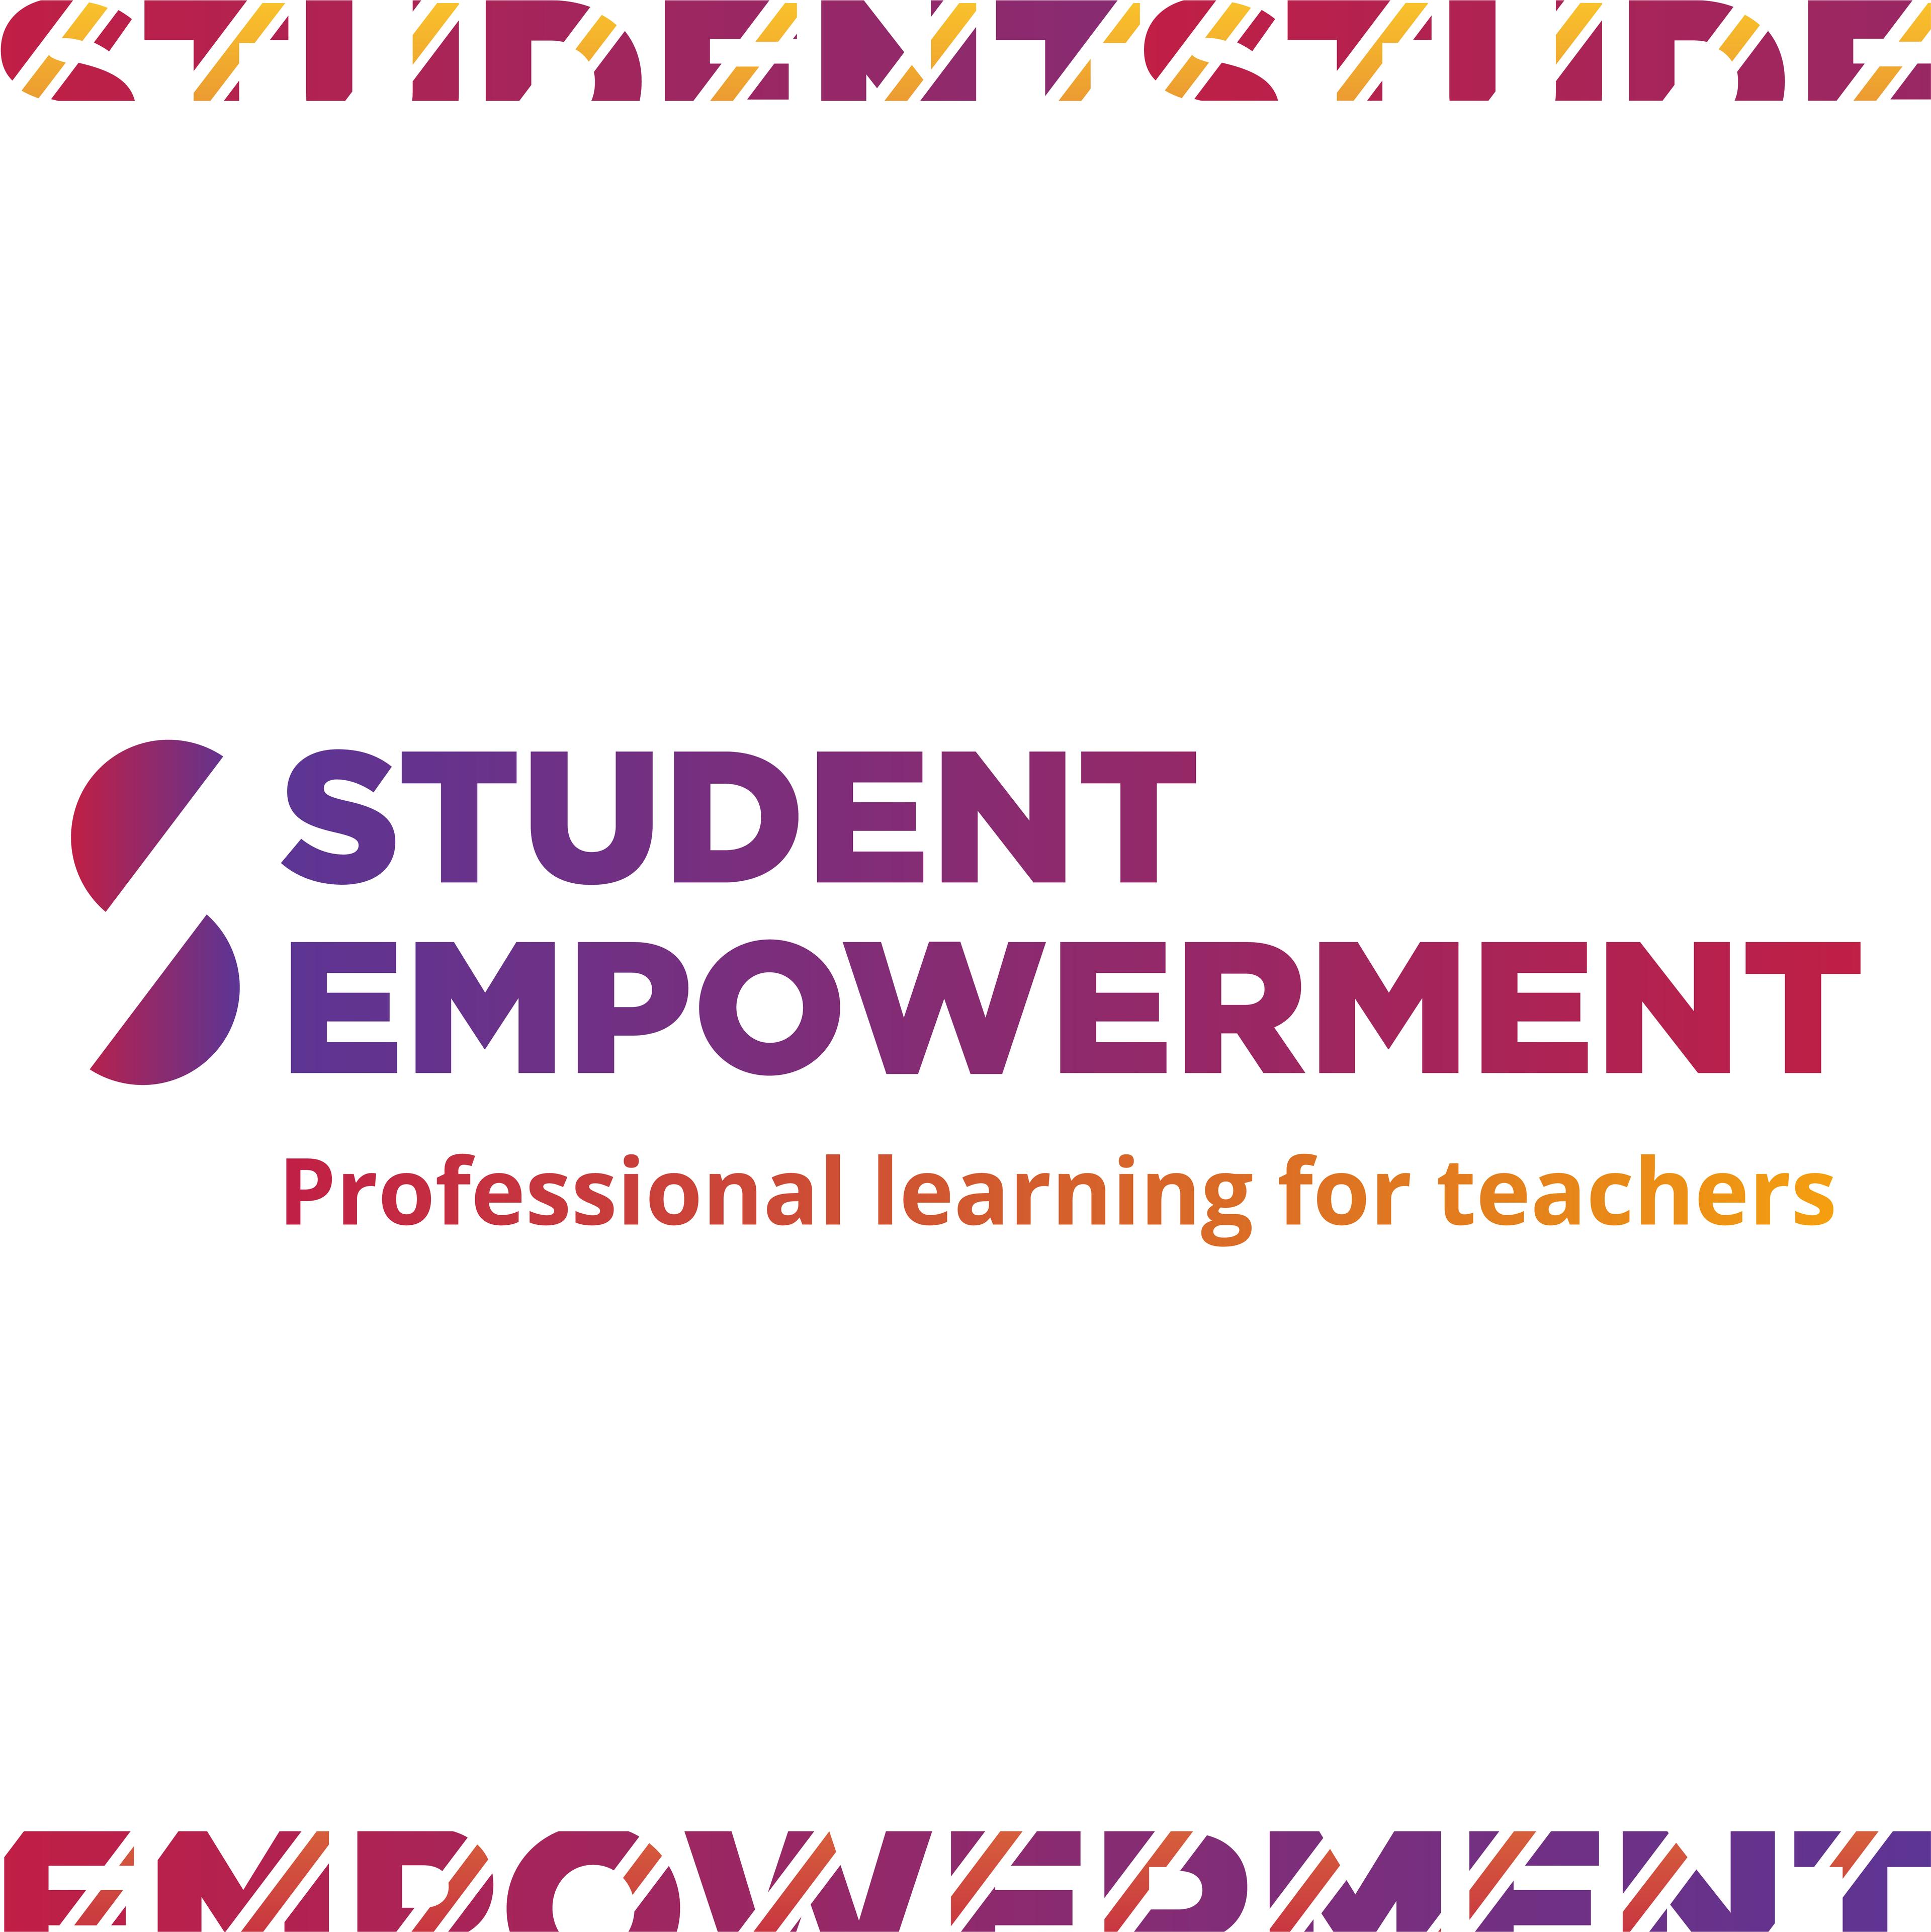 Webtile for Student Empowerment Professional Learning for Teachers